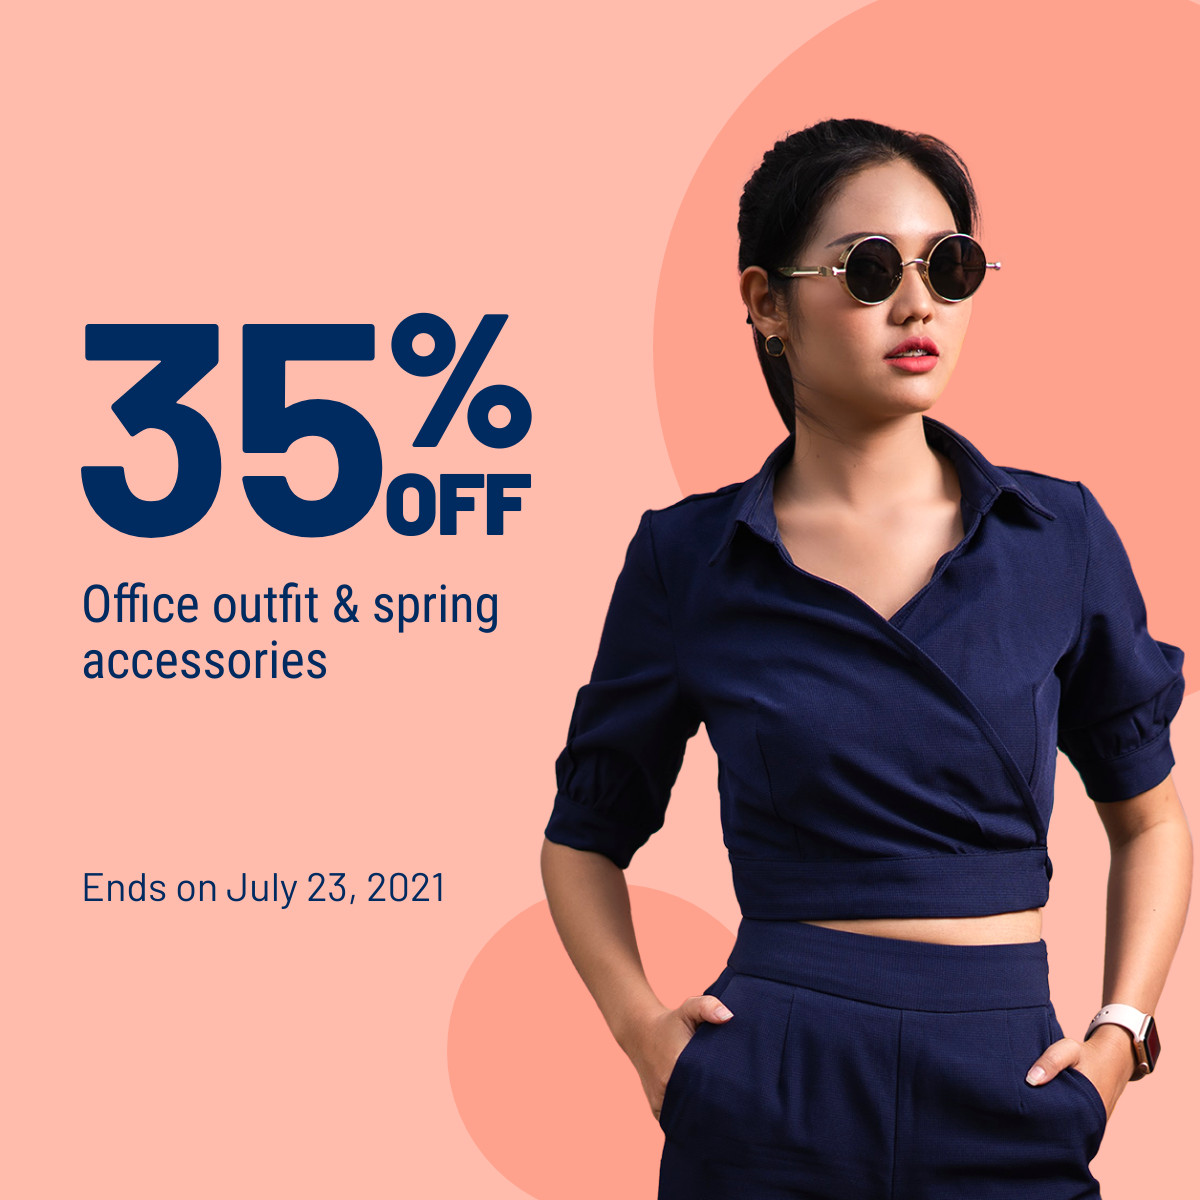 Office Outfit and Spring Accessories Deal  Inline Rectangle 300x250